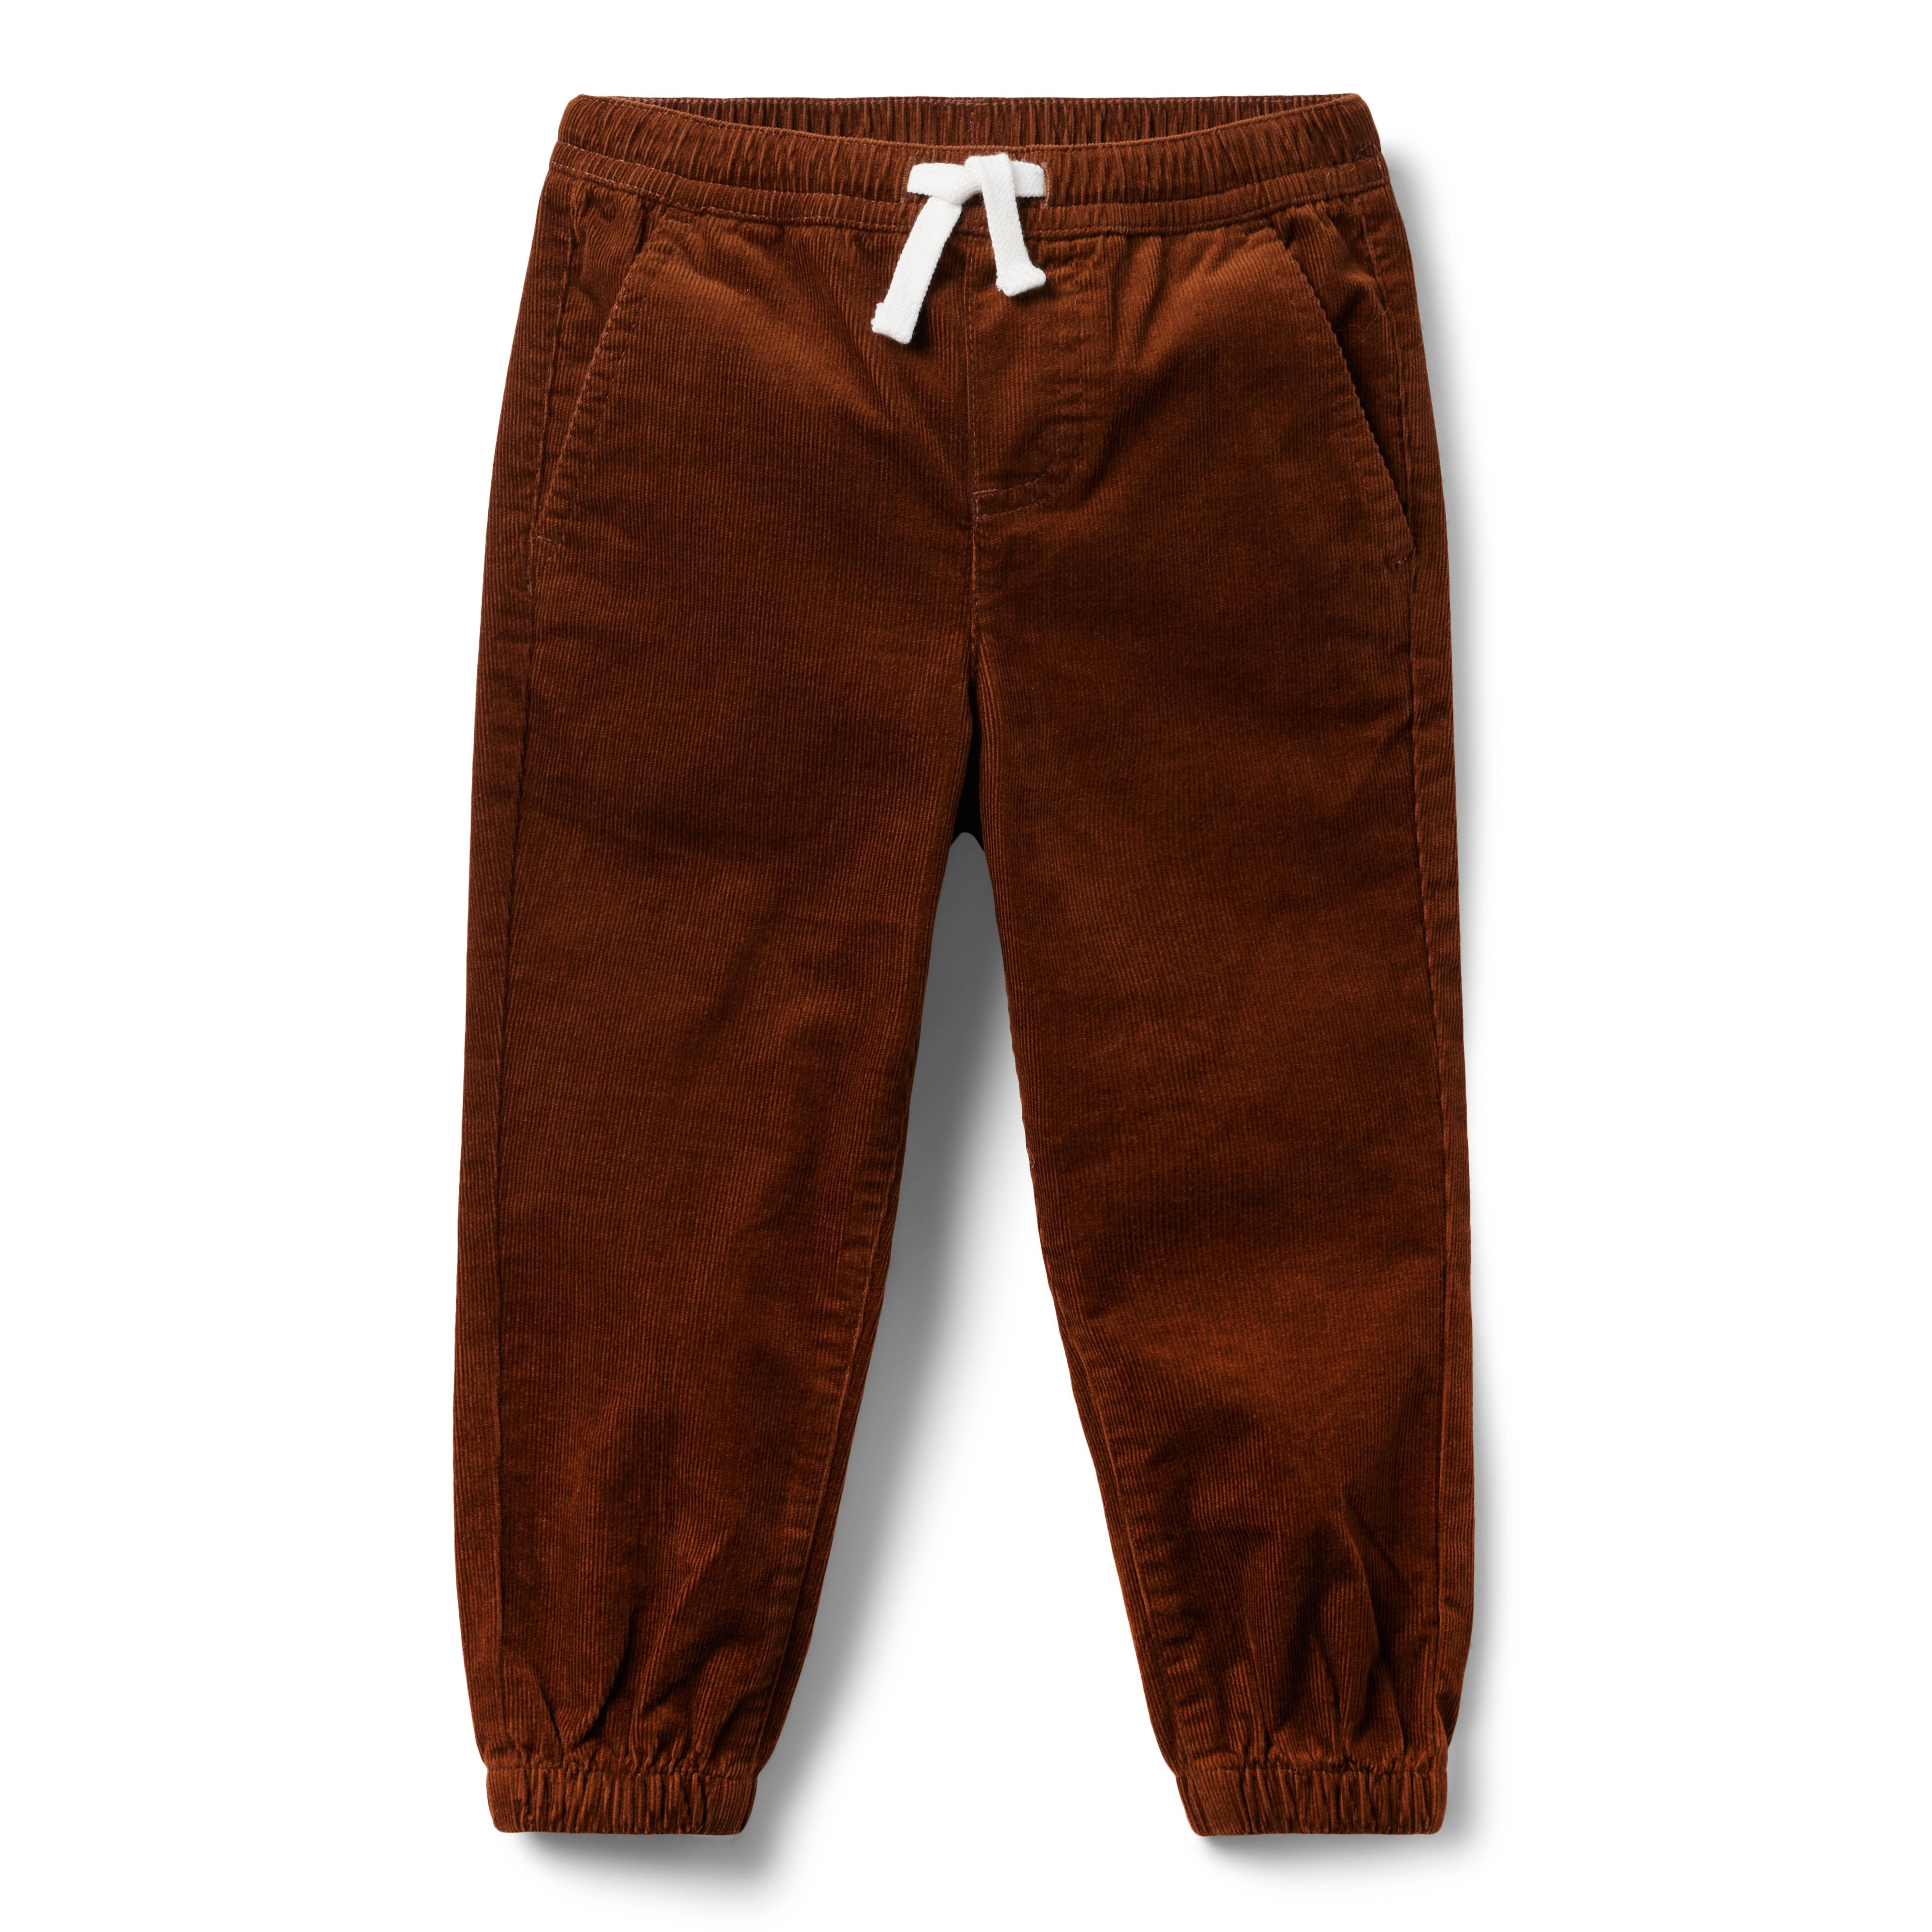 Boy Cinnamon The Corduroy Jogger by Janie and Jack